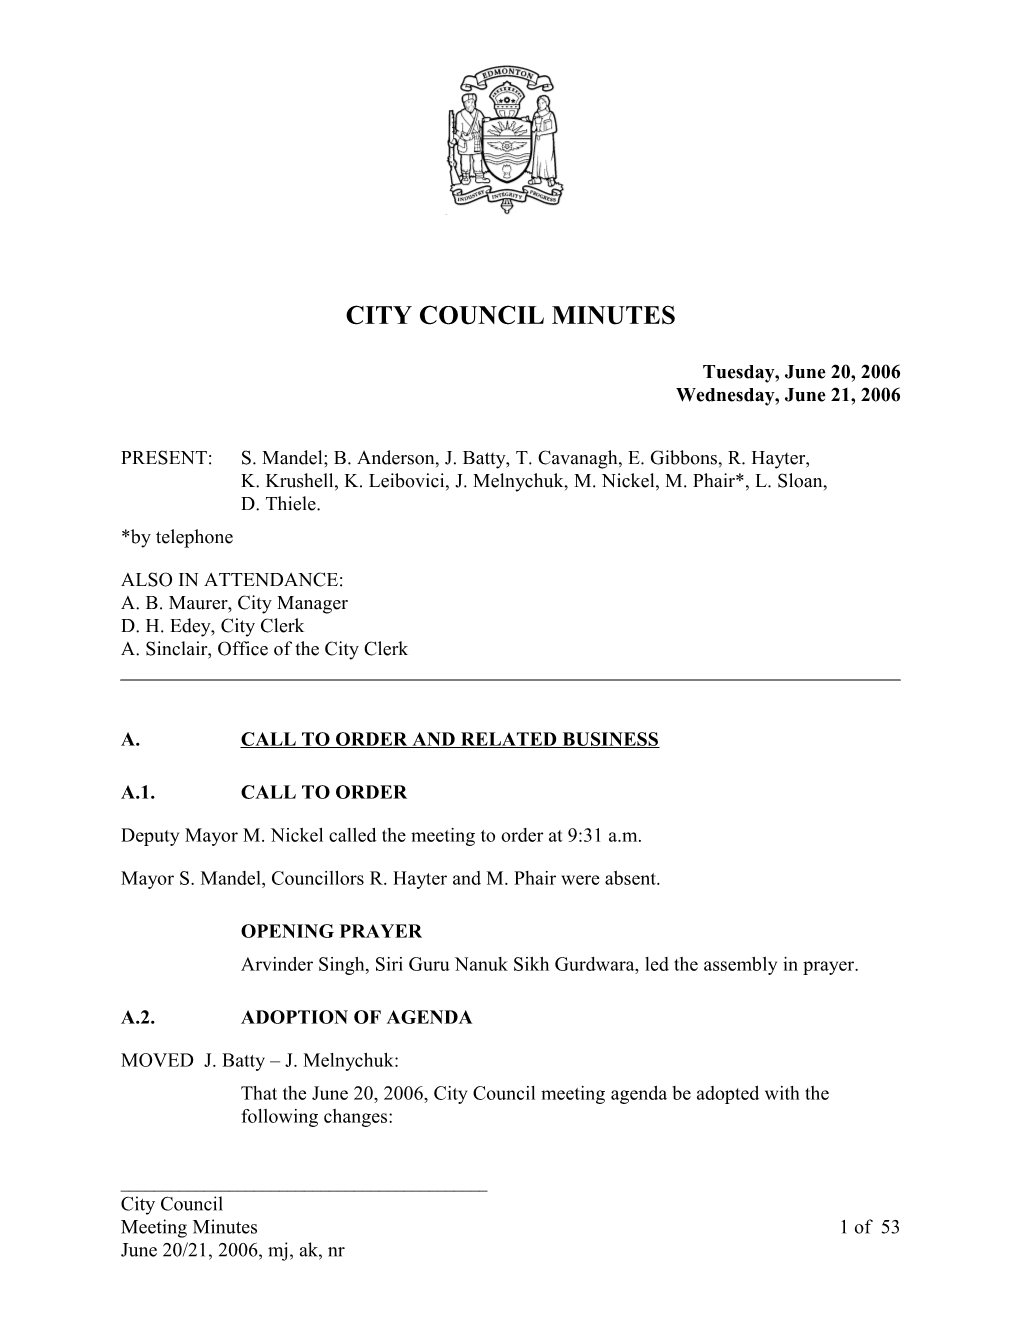 Minutes for City Council June 20, 2006 Meeting